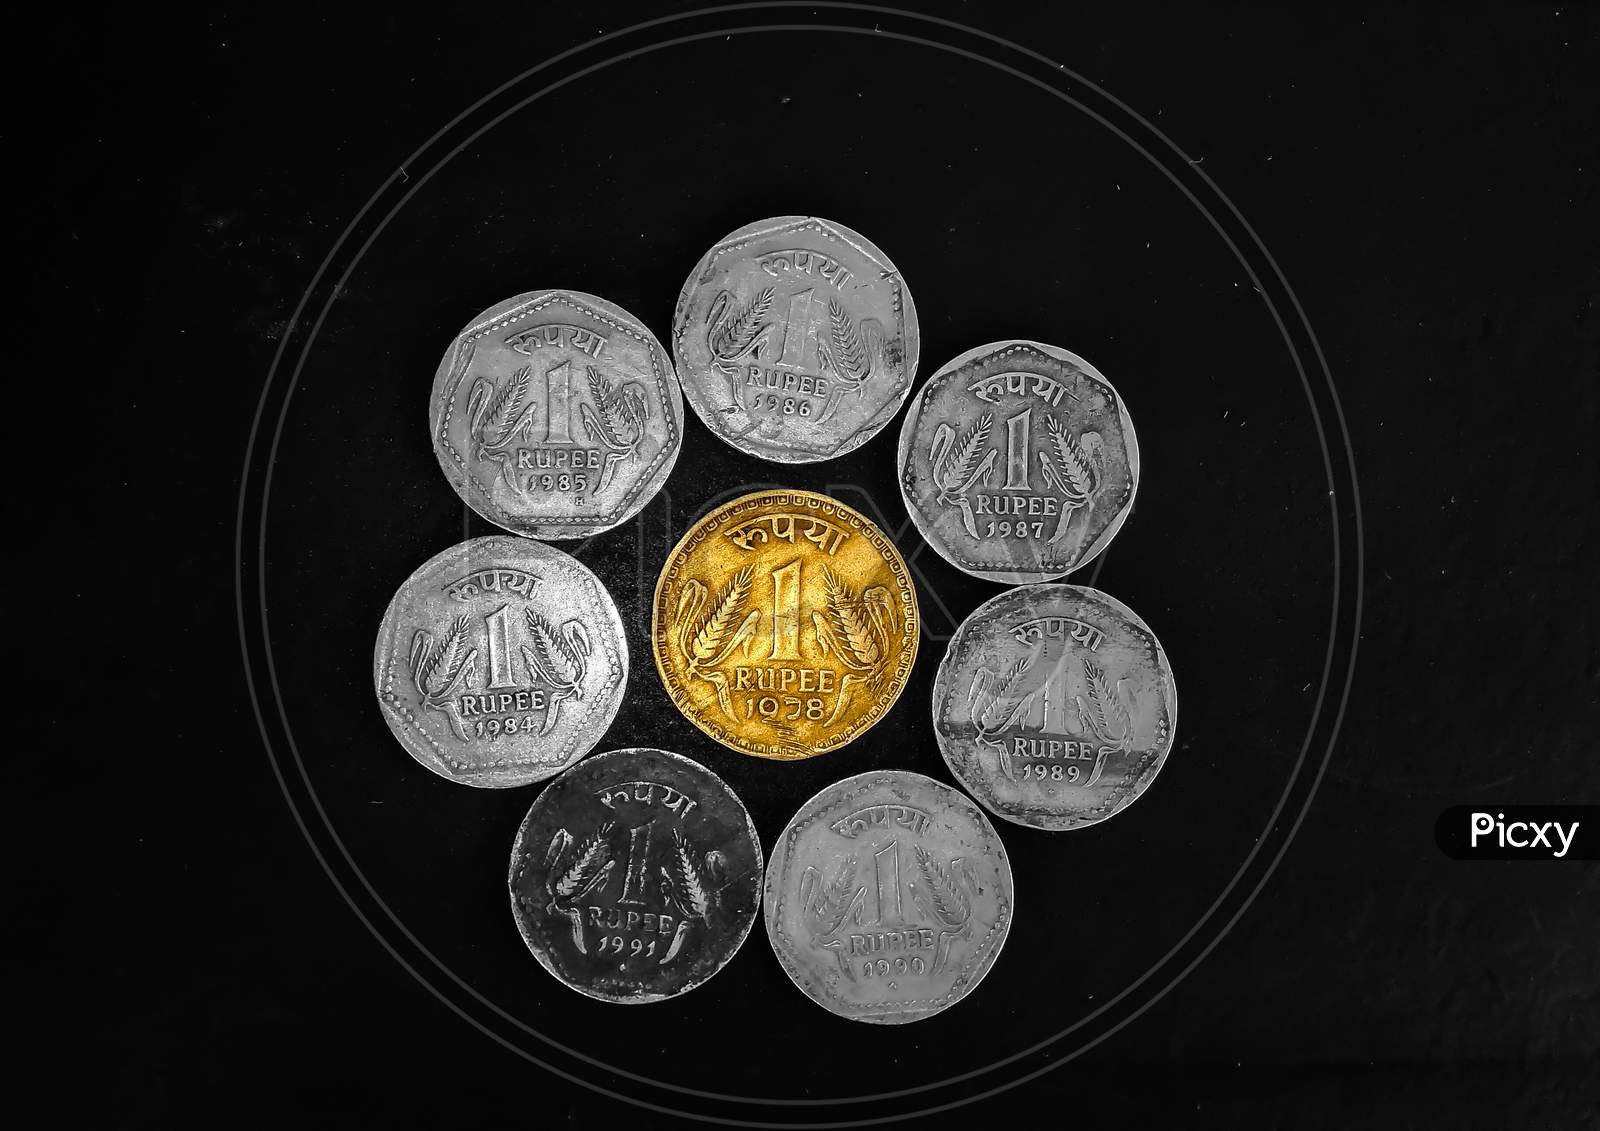 Old Indian One Rupee Coins In the Year Of 1978-1991